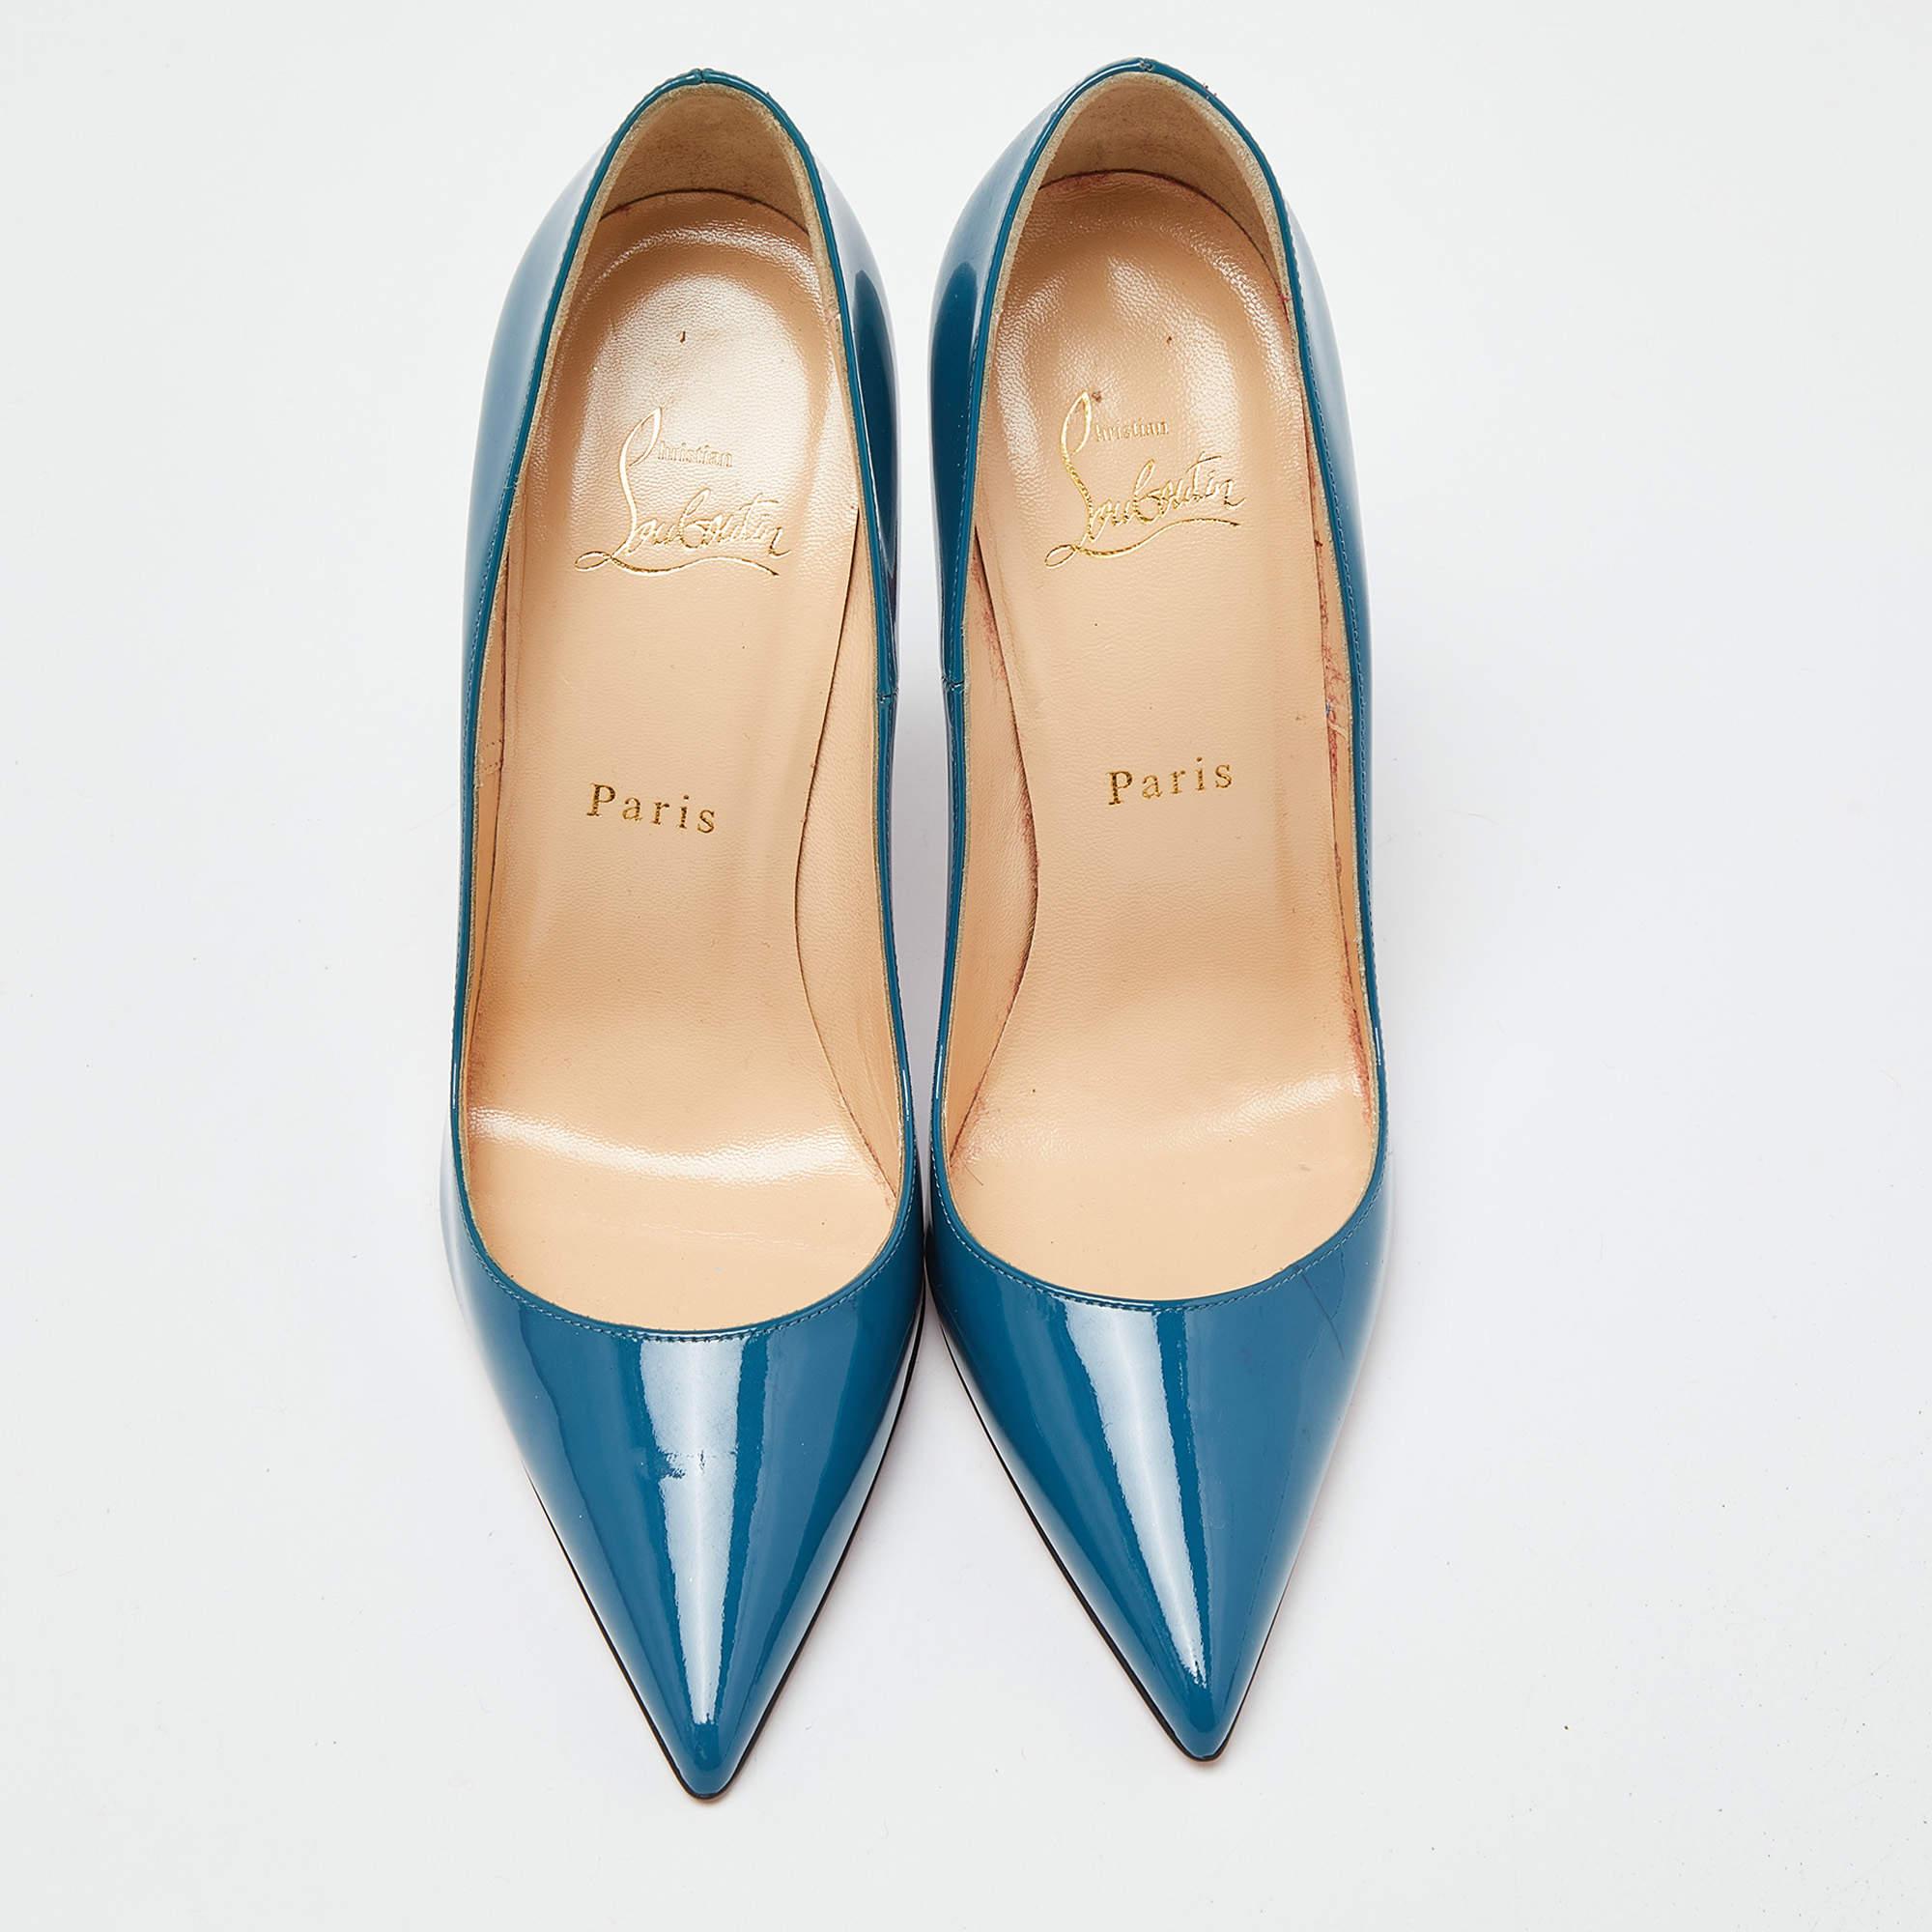 The architectural silhouette and contemporary design of this pair of Christian Louboutin pumps exemplify the brand's mastery in the art of stiletto making. Finely created from blue patent leather, it stands elegantly on 11cm heels. The signature